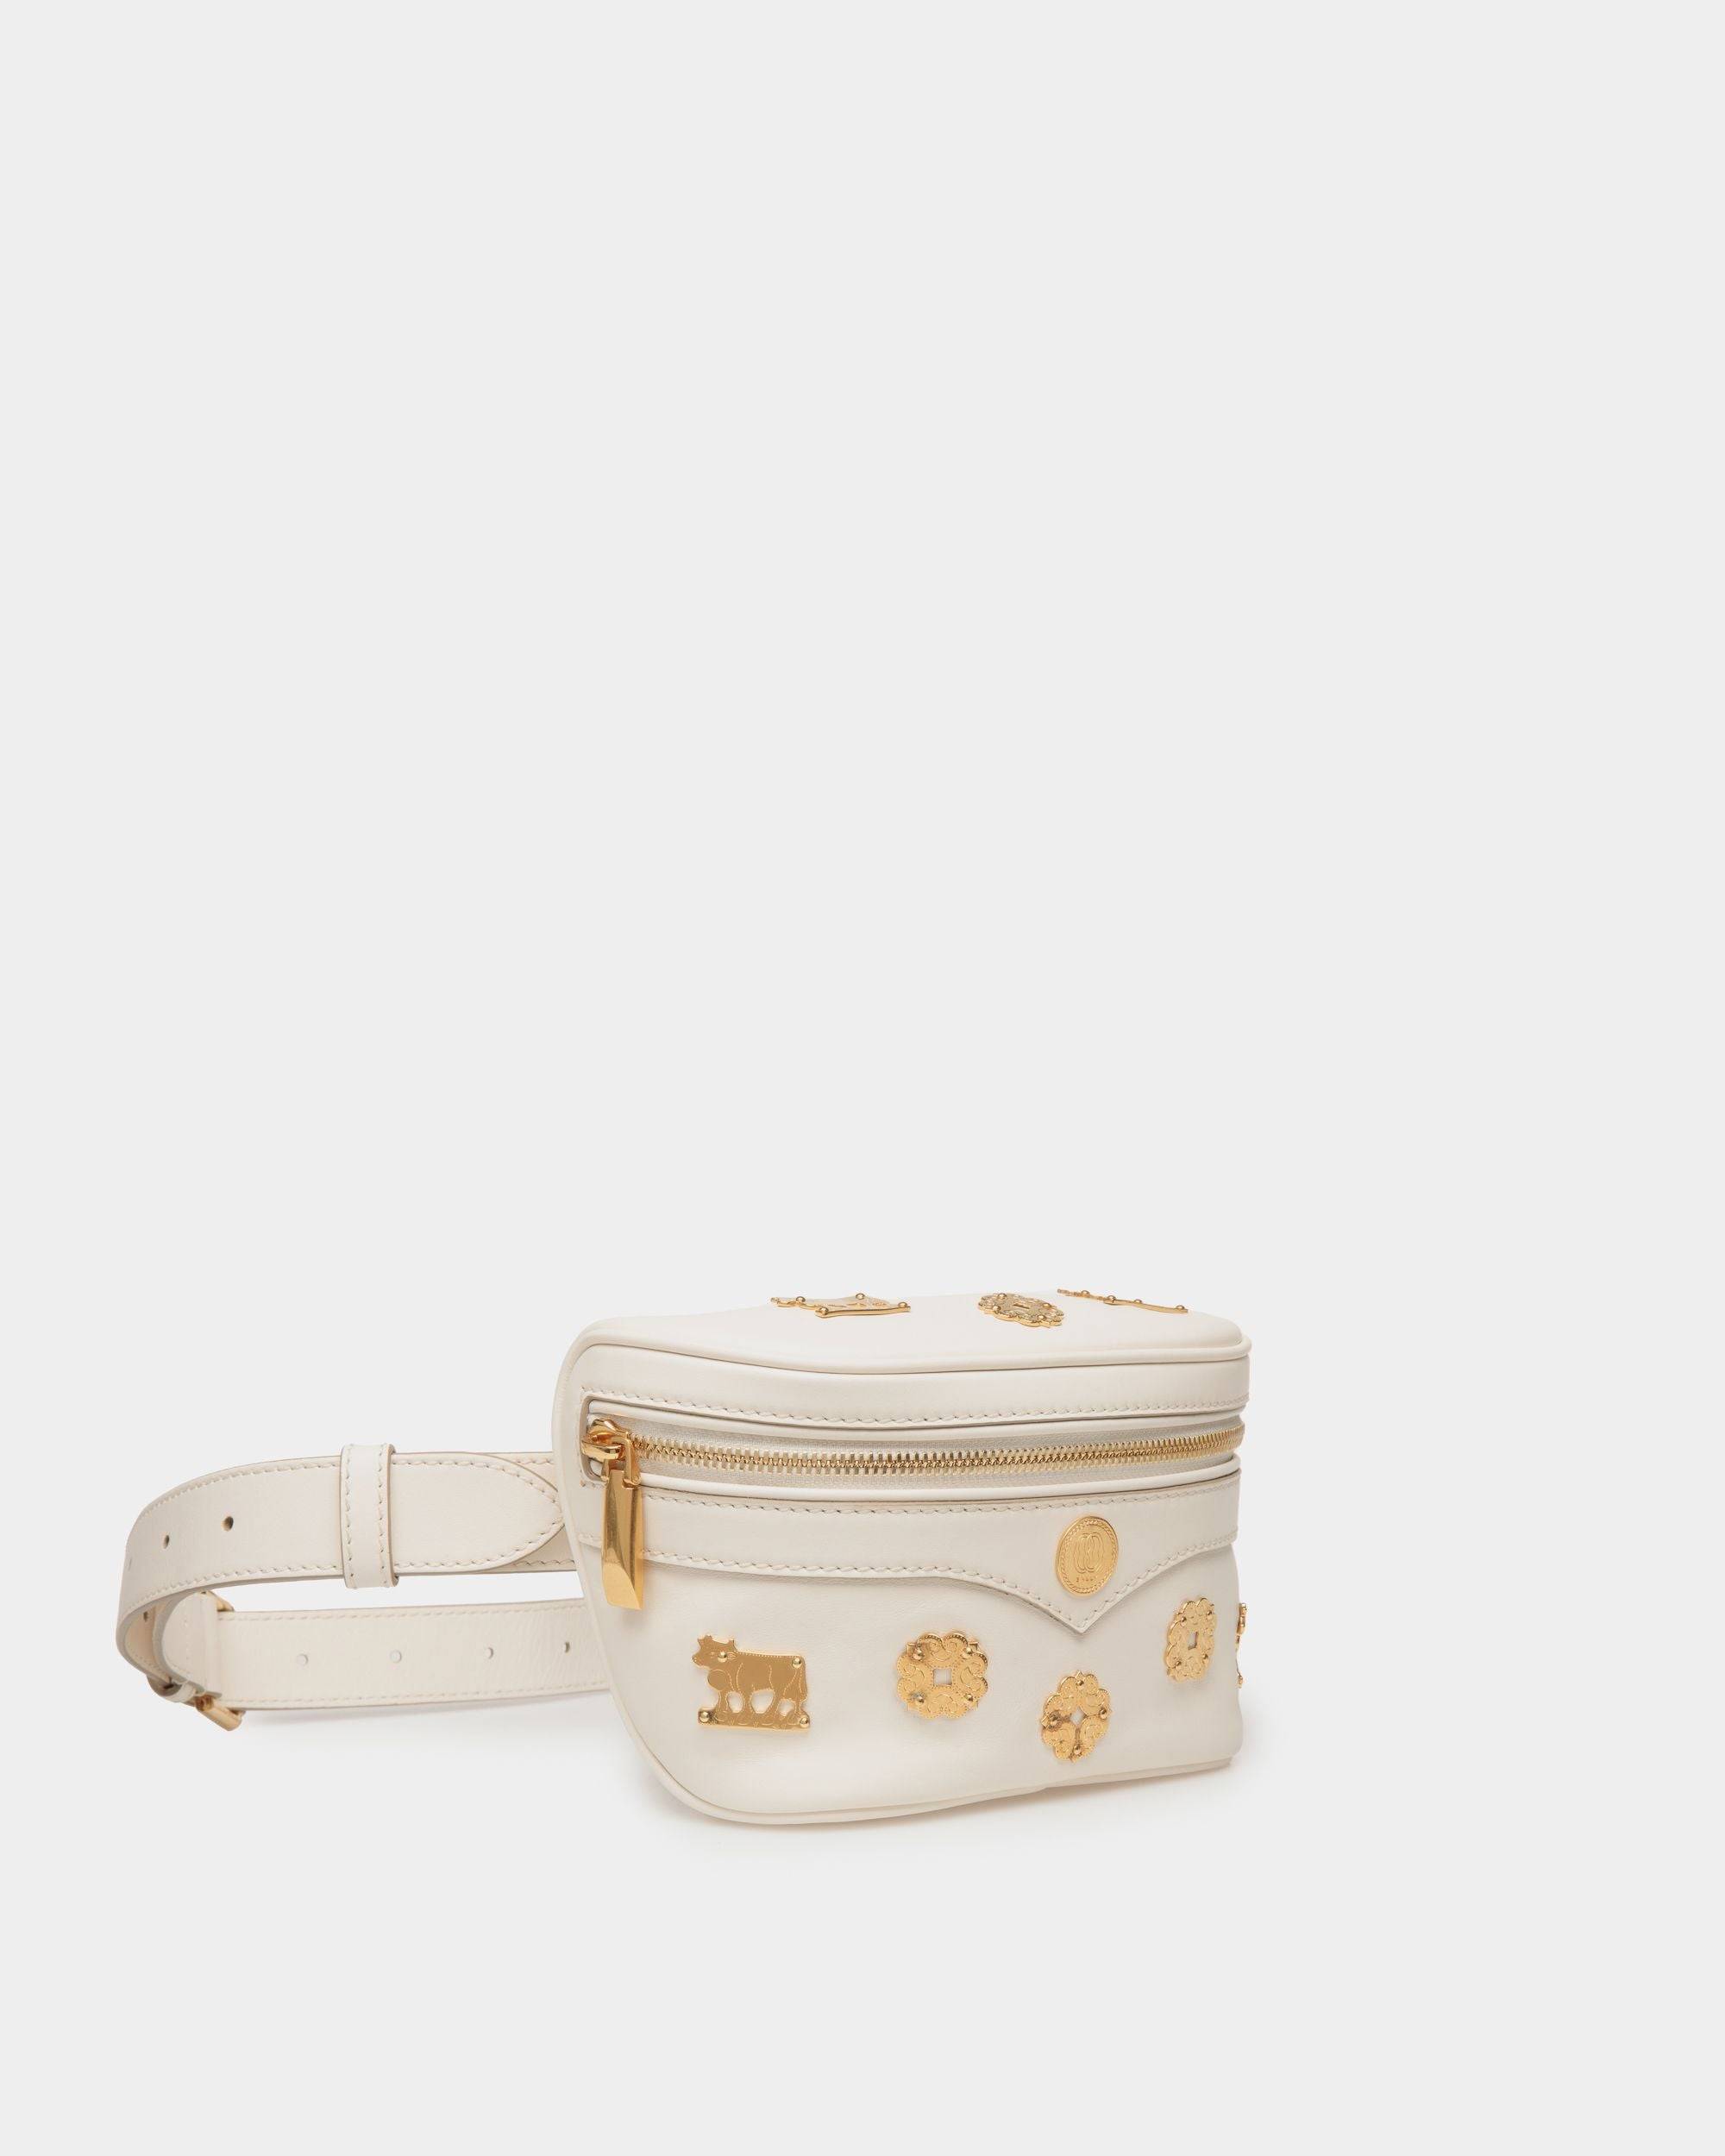 Moutain | Women's Belt Bag  in White Leather | Bally | Still Life 3/4 Front